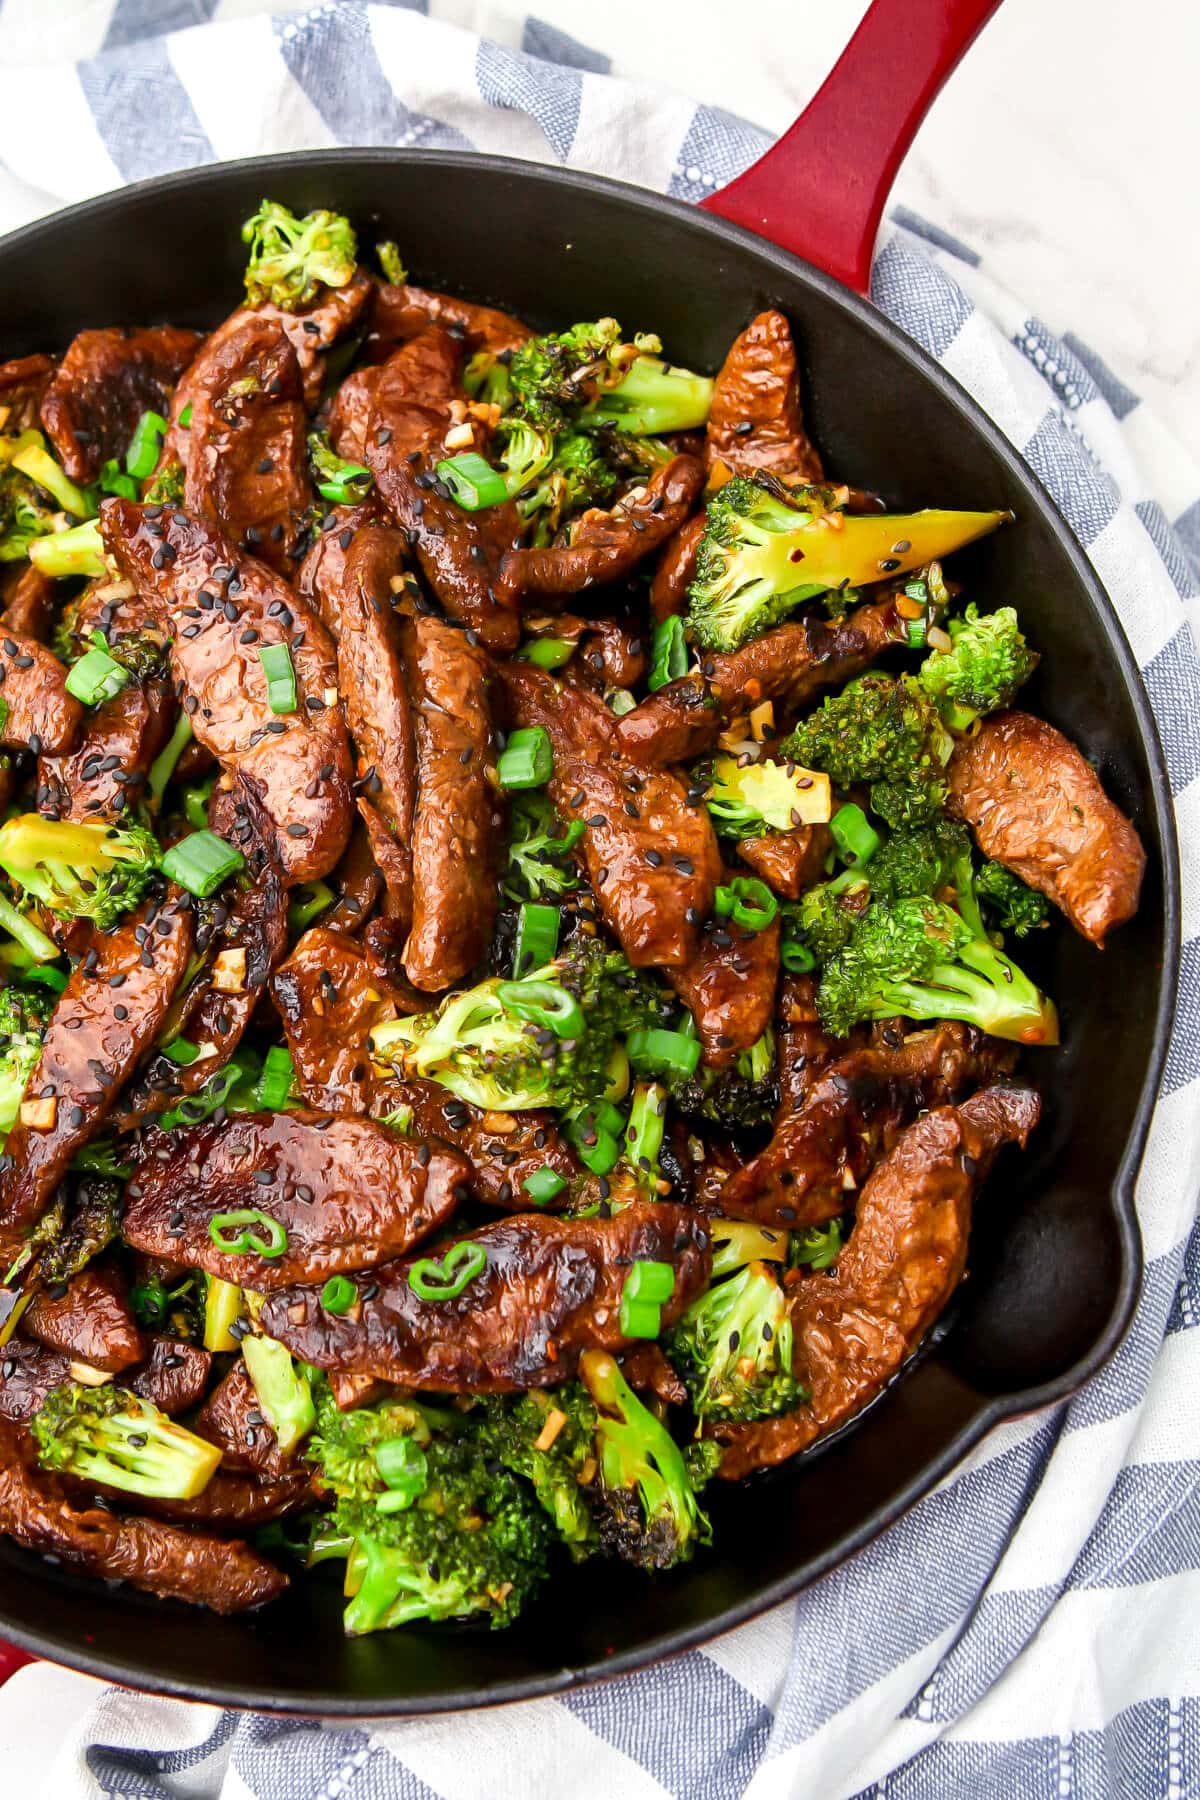 A skillet full of vegan beef and broccoli stir fry garnished with sesame seeds and green onions.